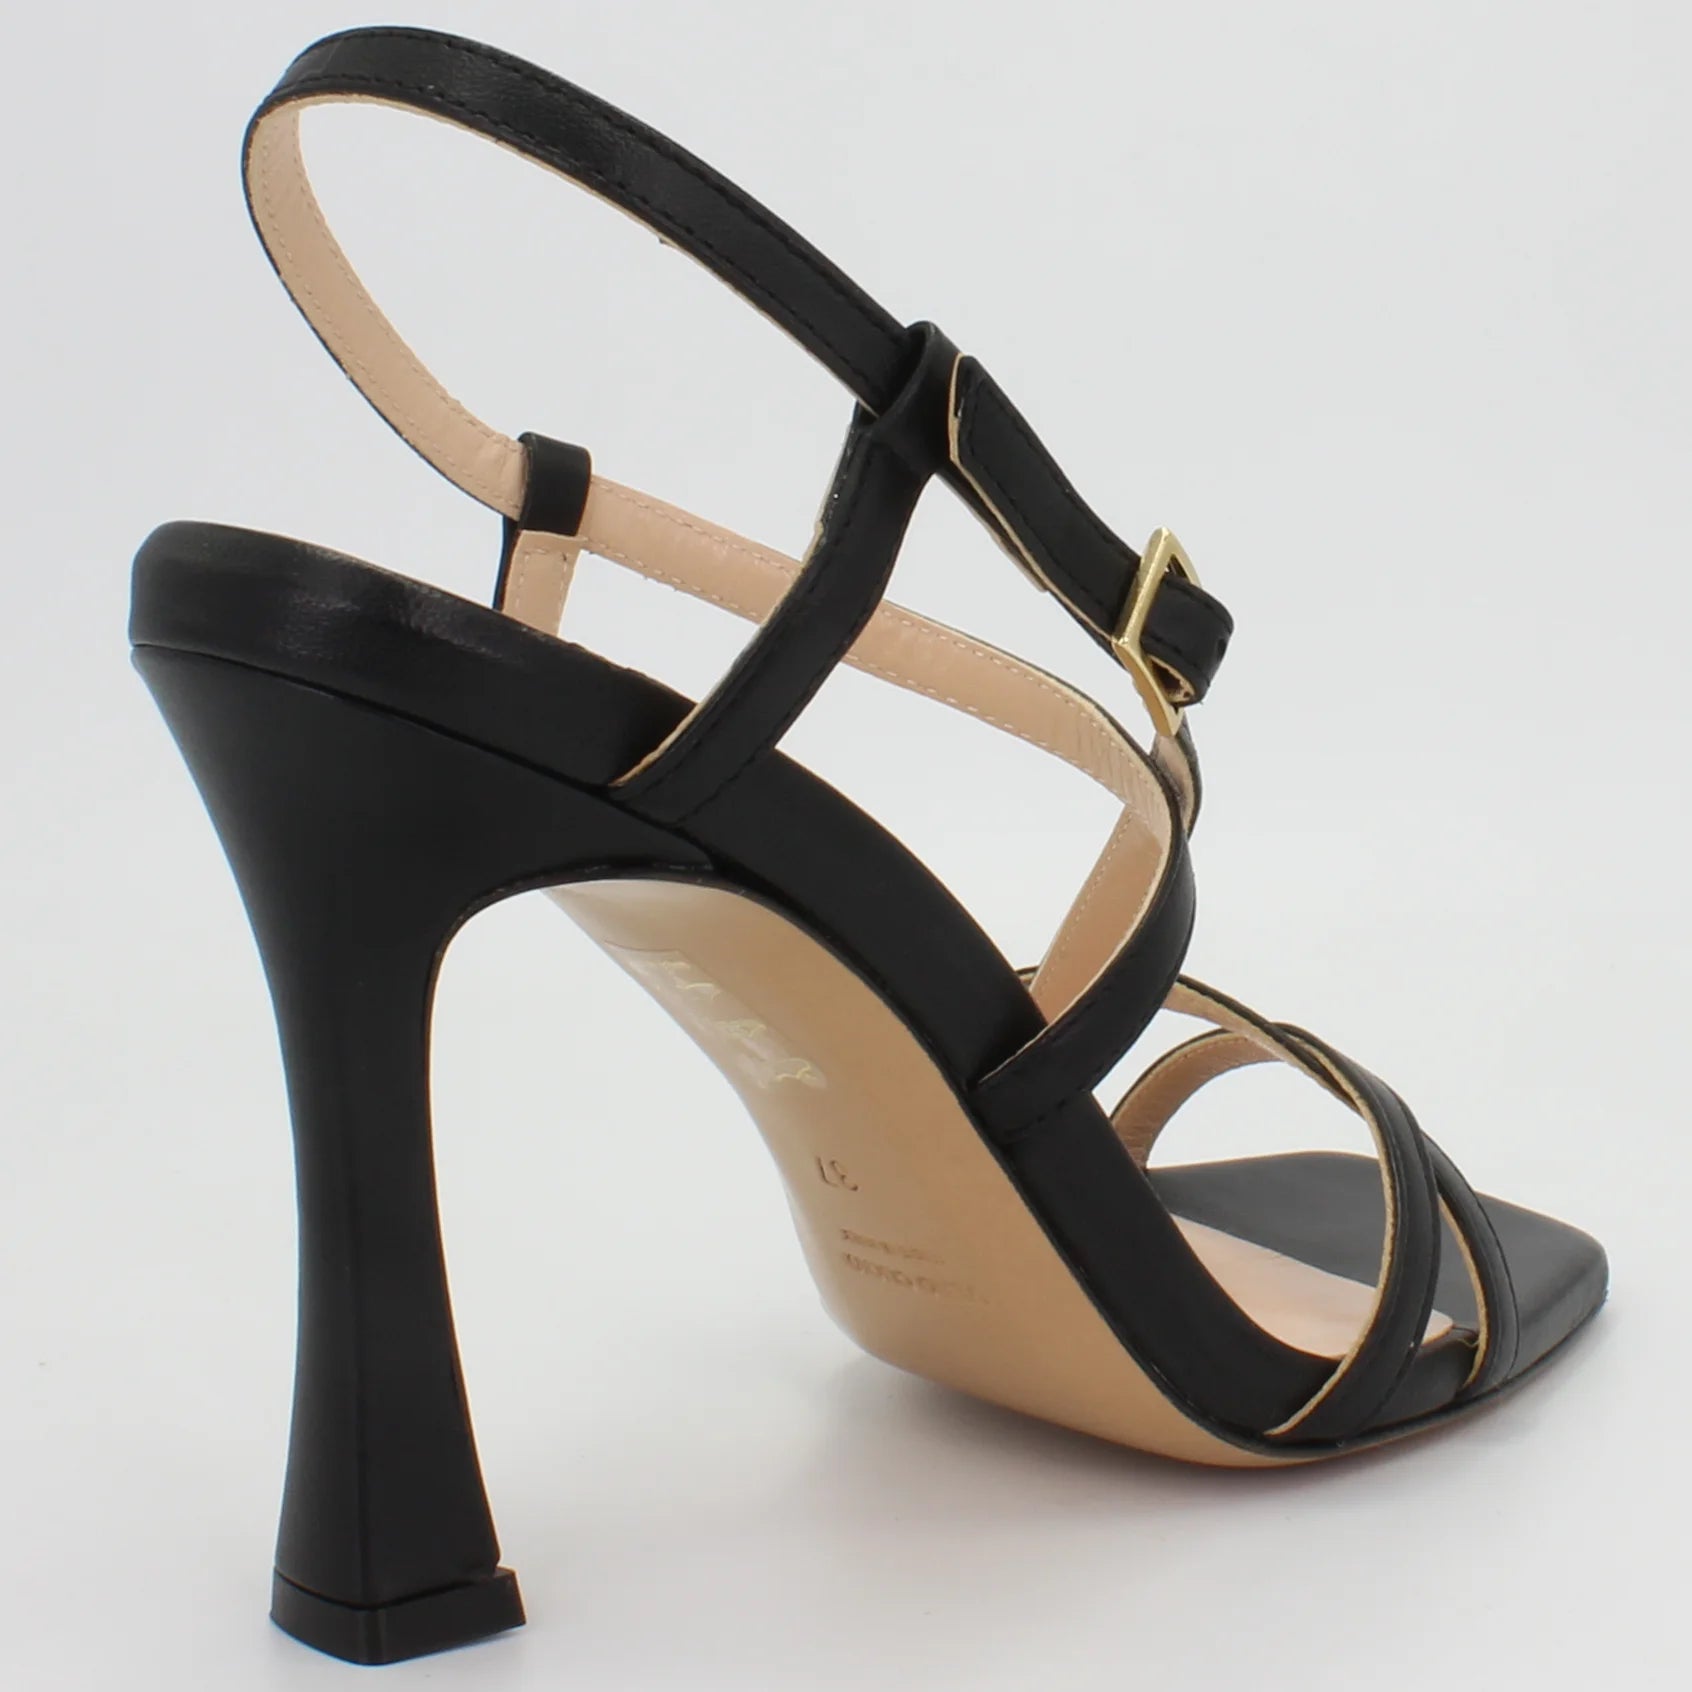 Shop Handmade Italian Leather High Heel in Nero (MP26102) or browse our range of hand-made Italian shoes for women in leather or suede in-store at Aliverti Cape Town, or shop online. We deliver in South Africa & offer multiple payment plans as well as accept multiple safe & secure payment methods.